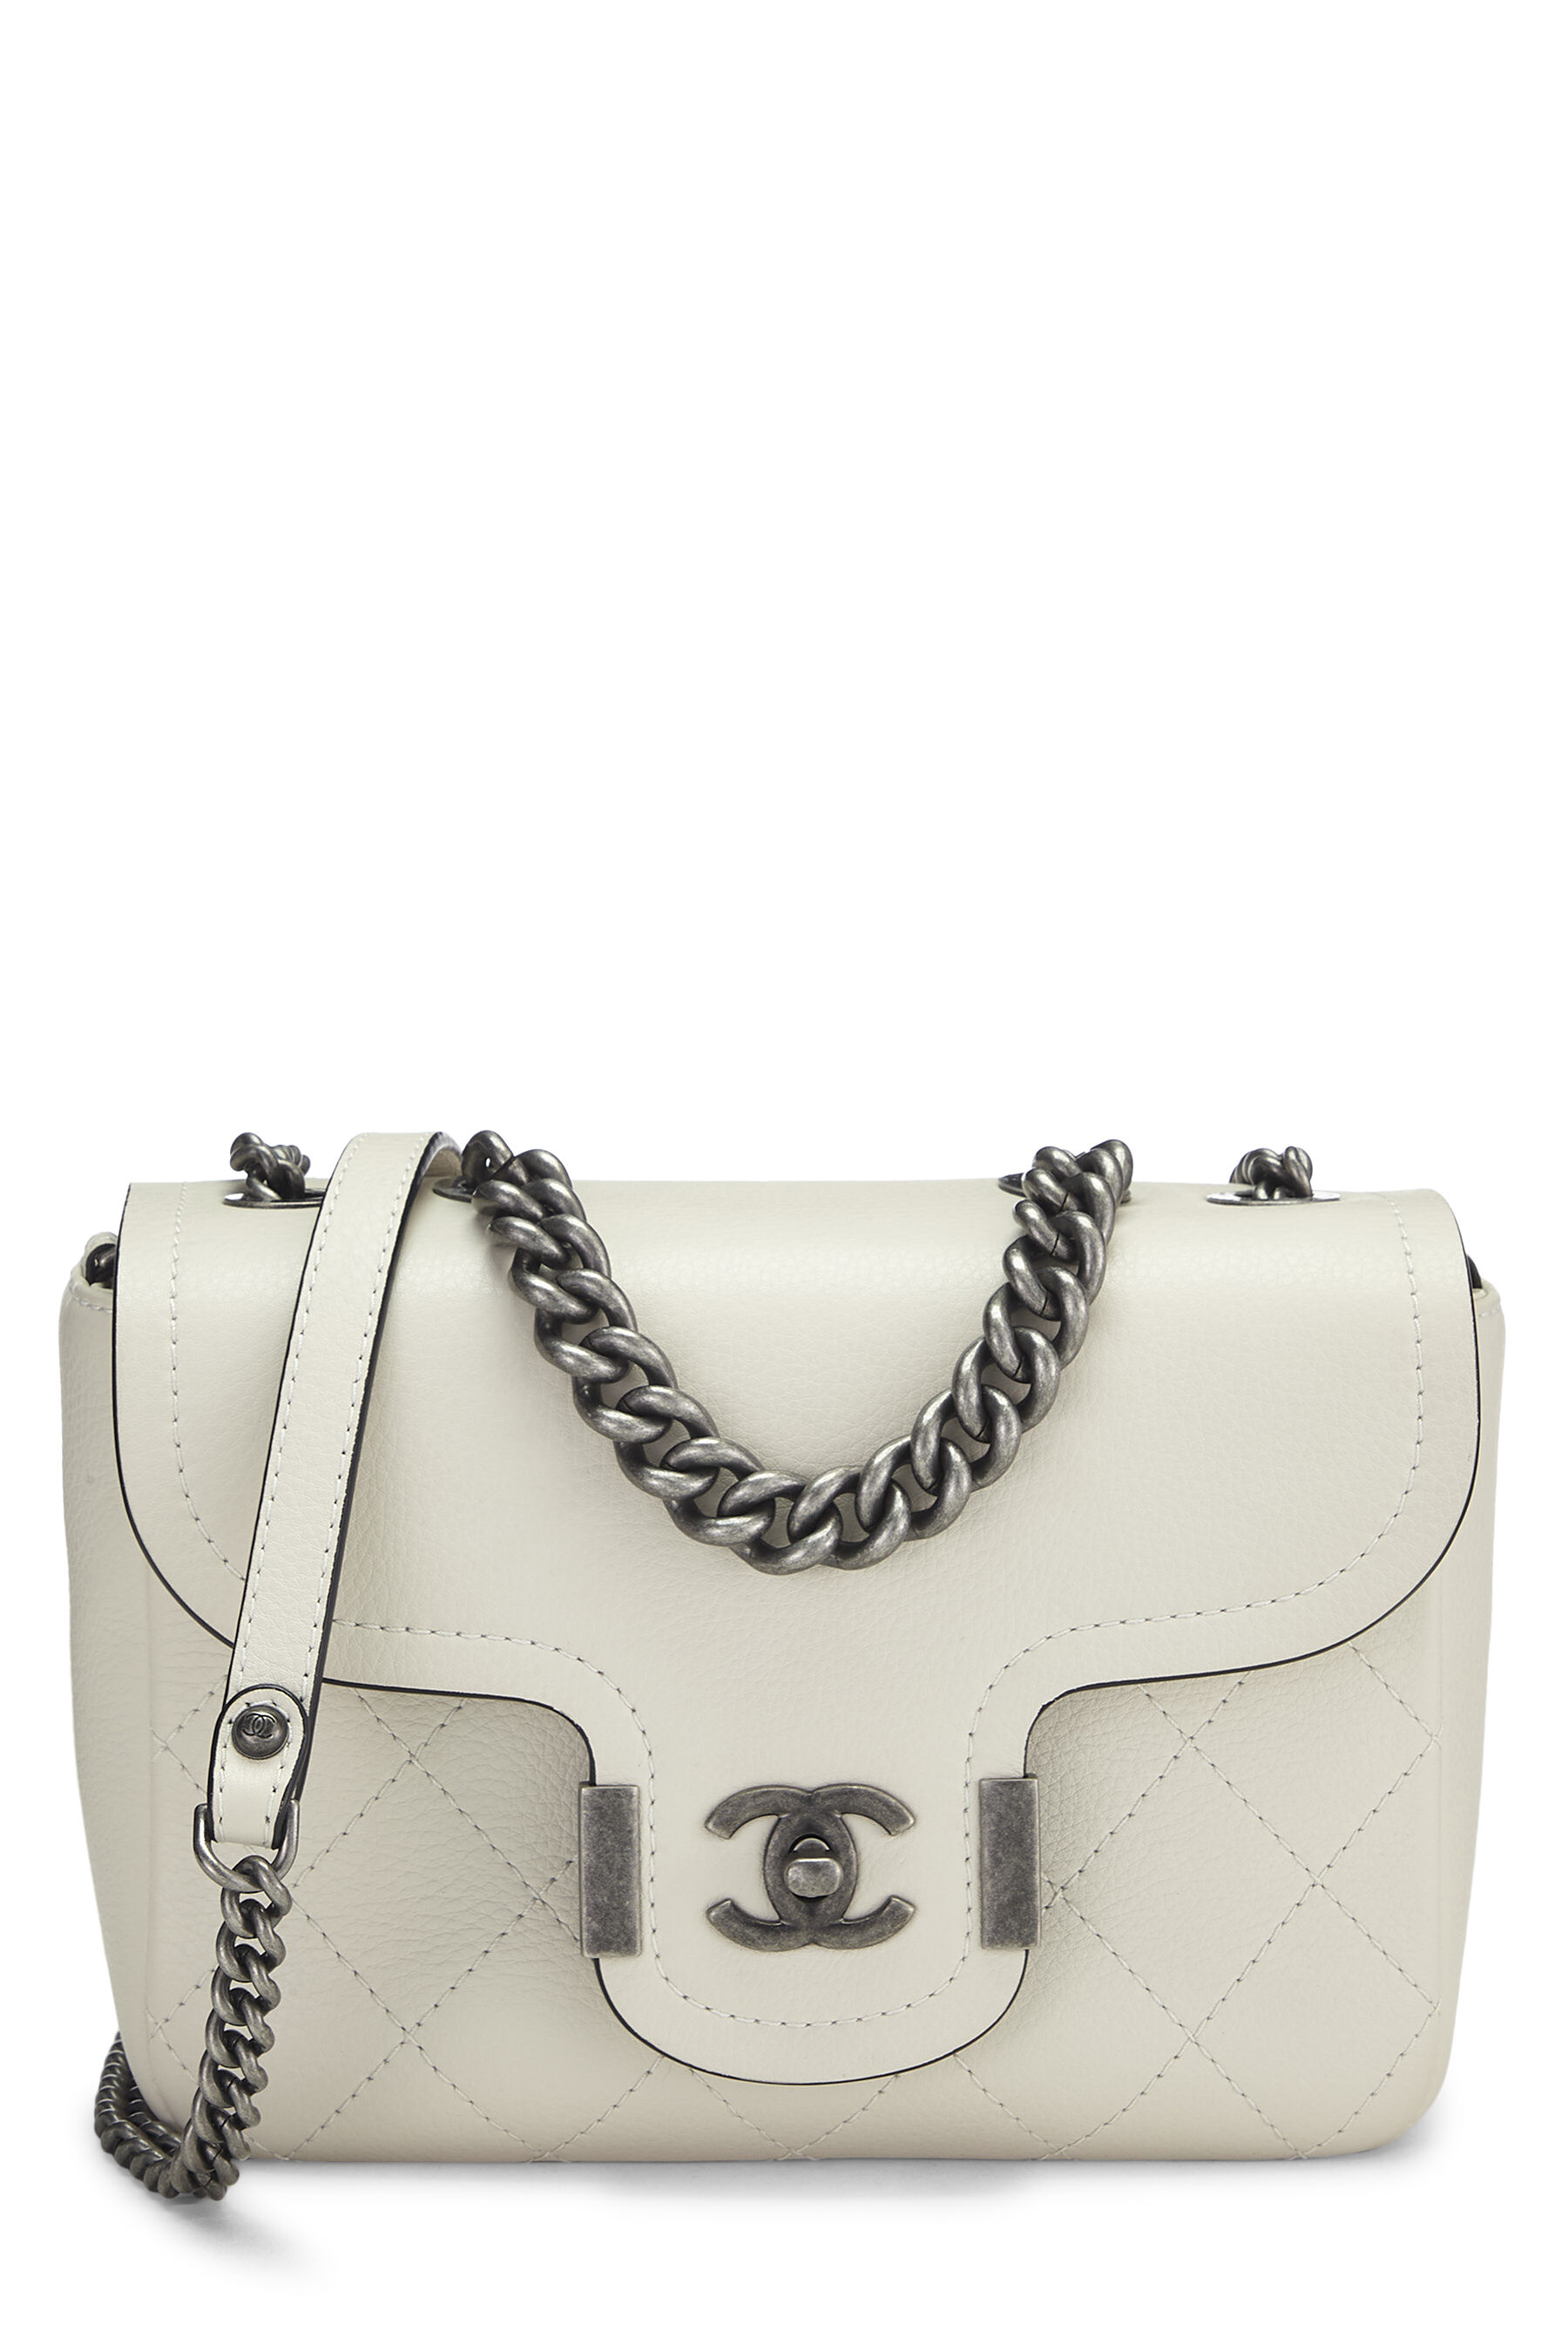 Chanel - White Calfskin Arch Flap Small